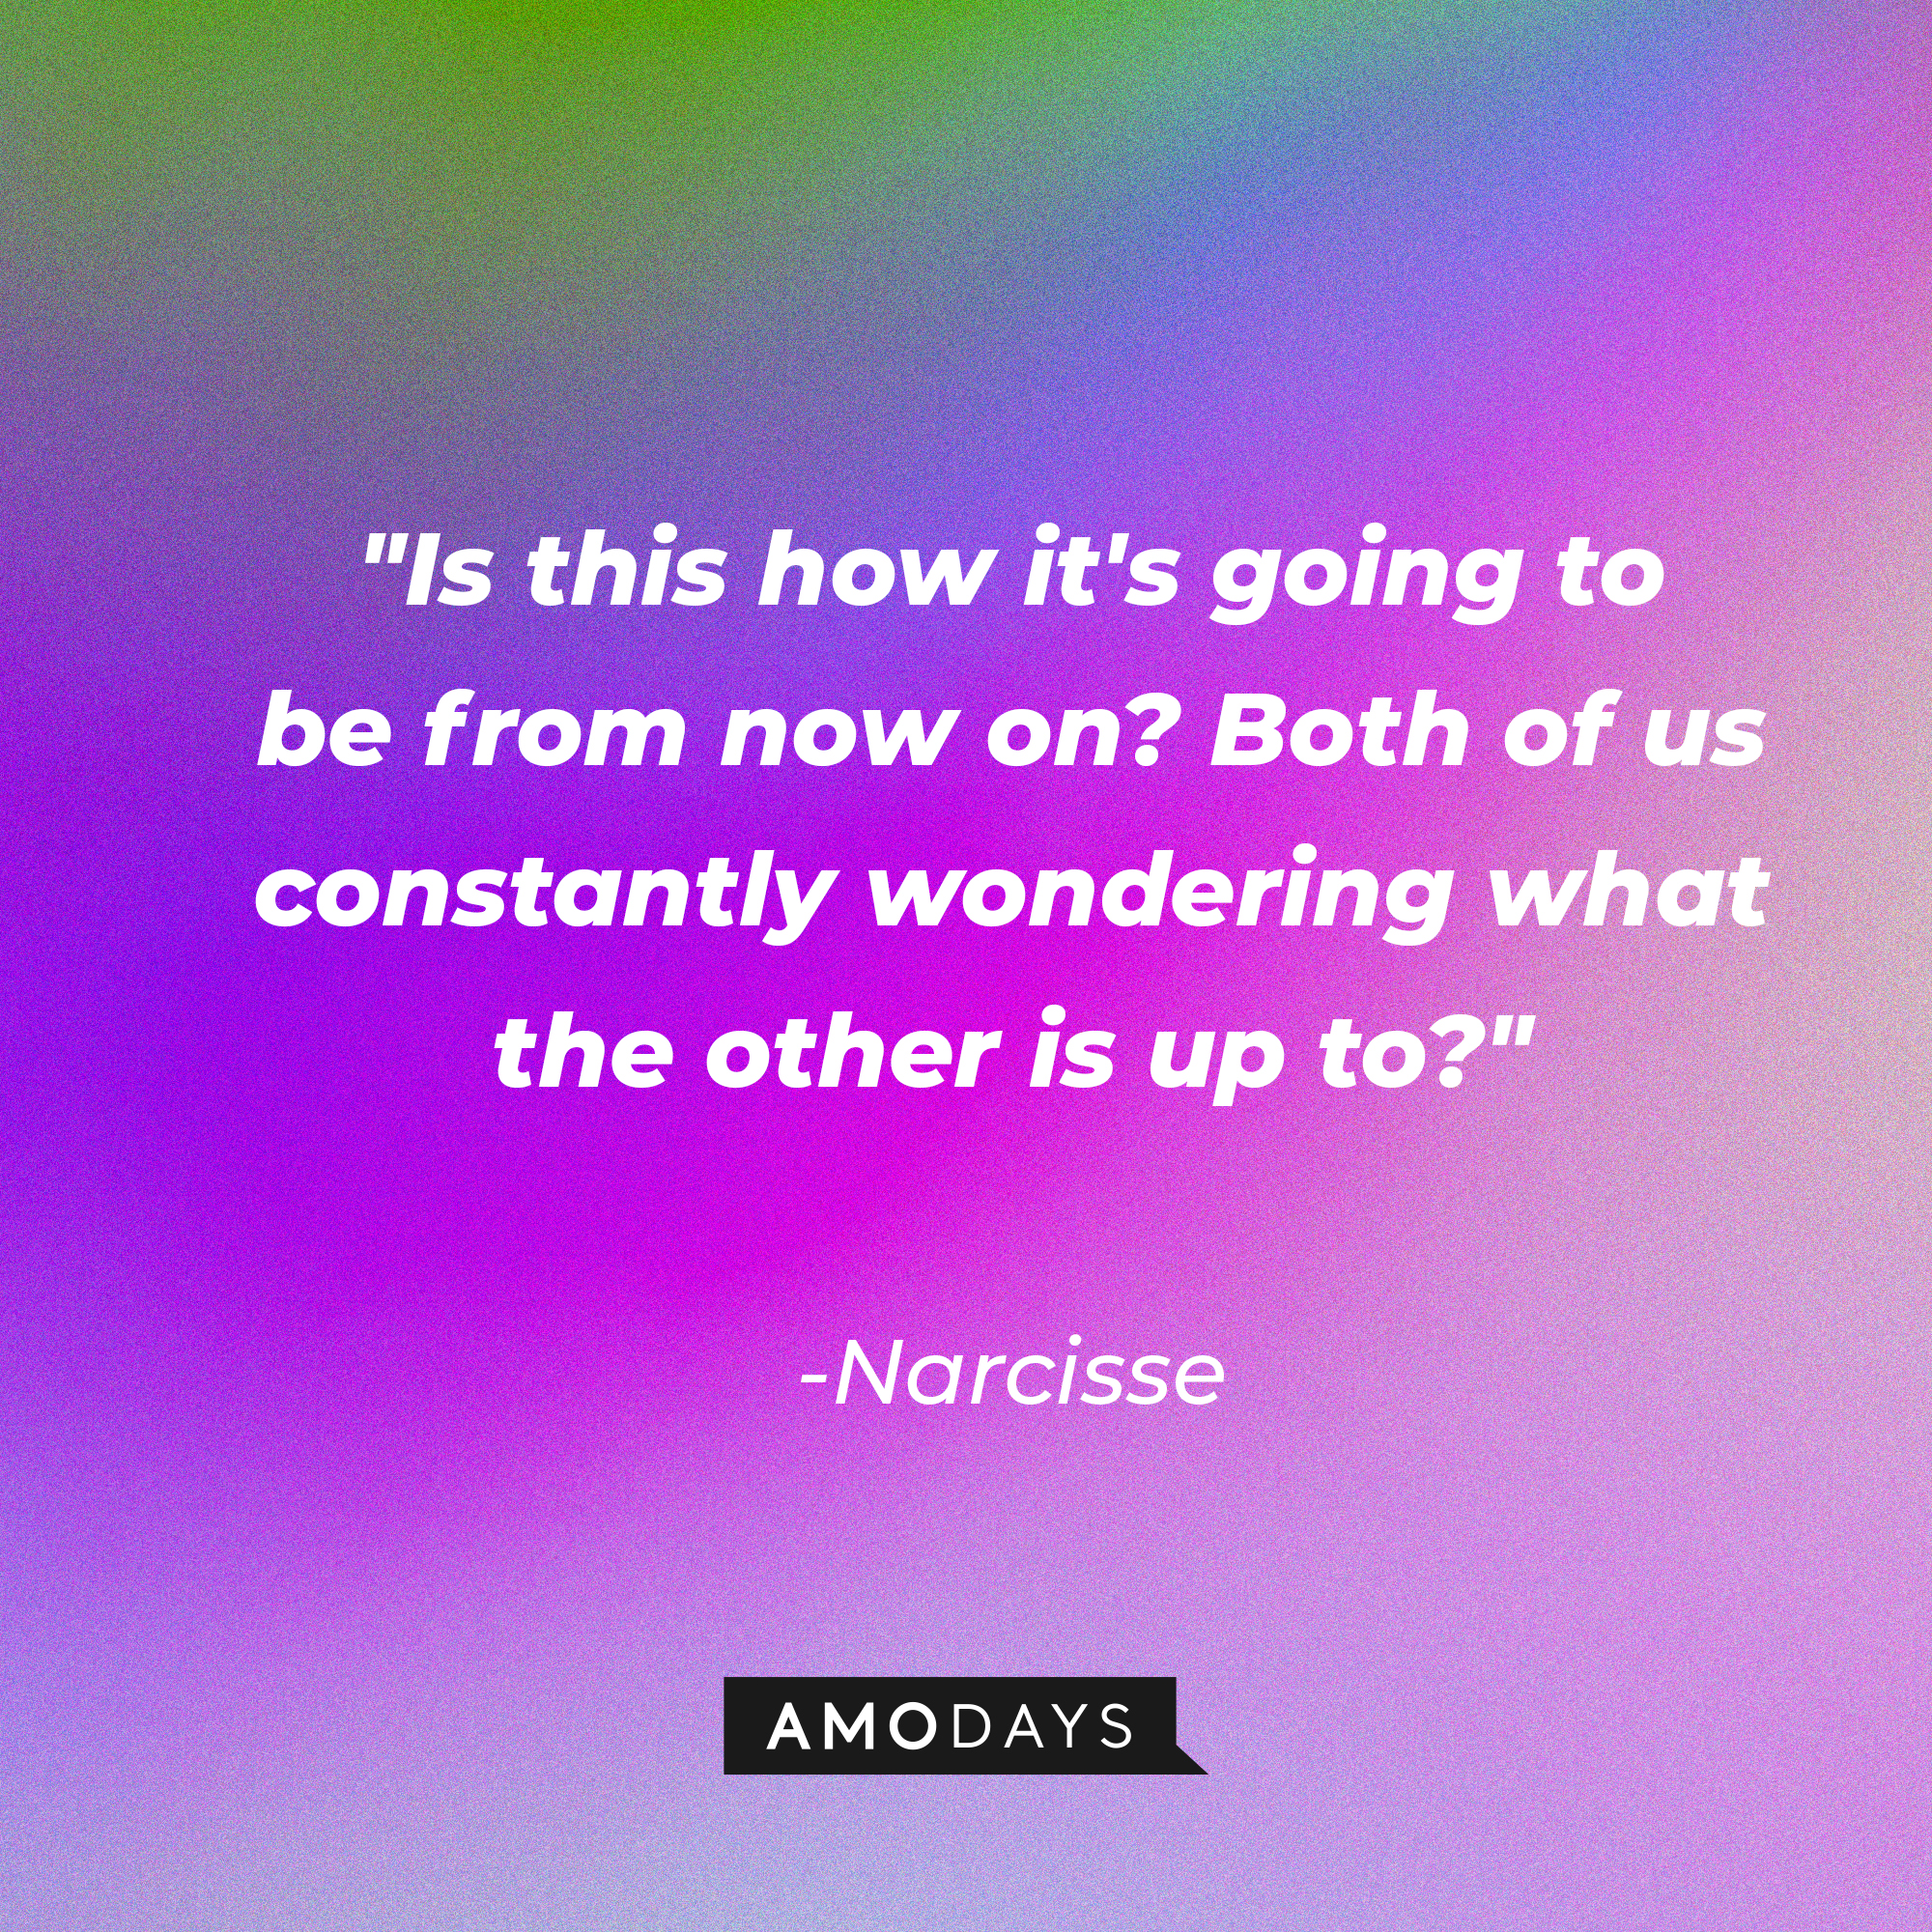 Narcisse's quote in "Reign:" "Is this how it's going to be from now on? Both of us constantly wondering what the other is up to?" | Source: Amodays